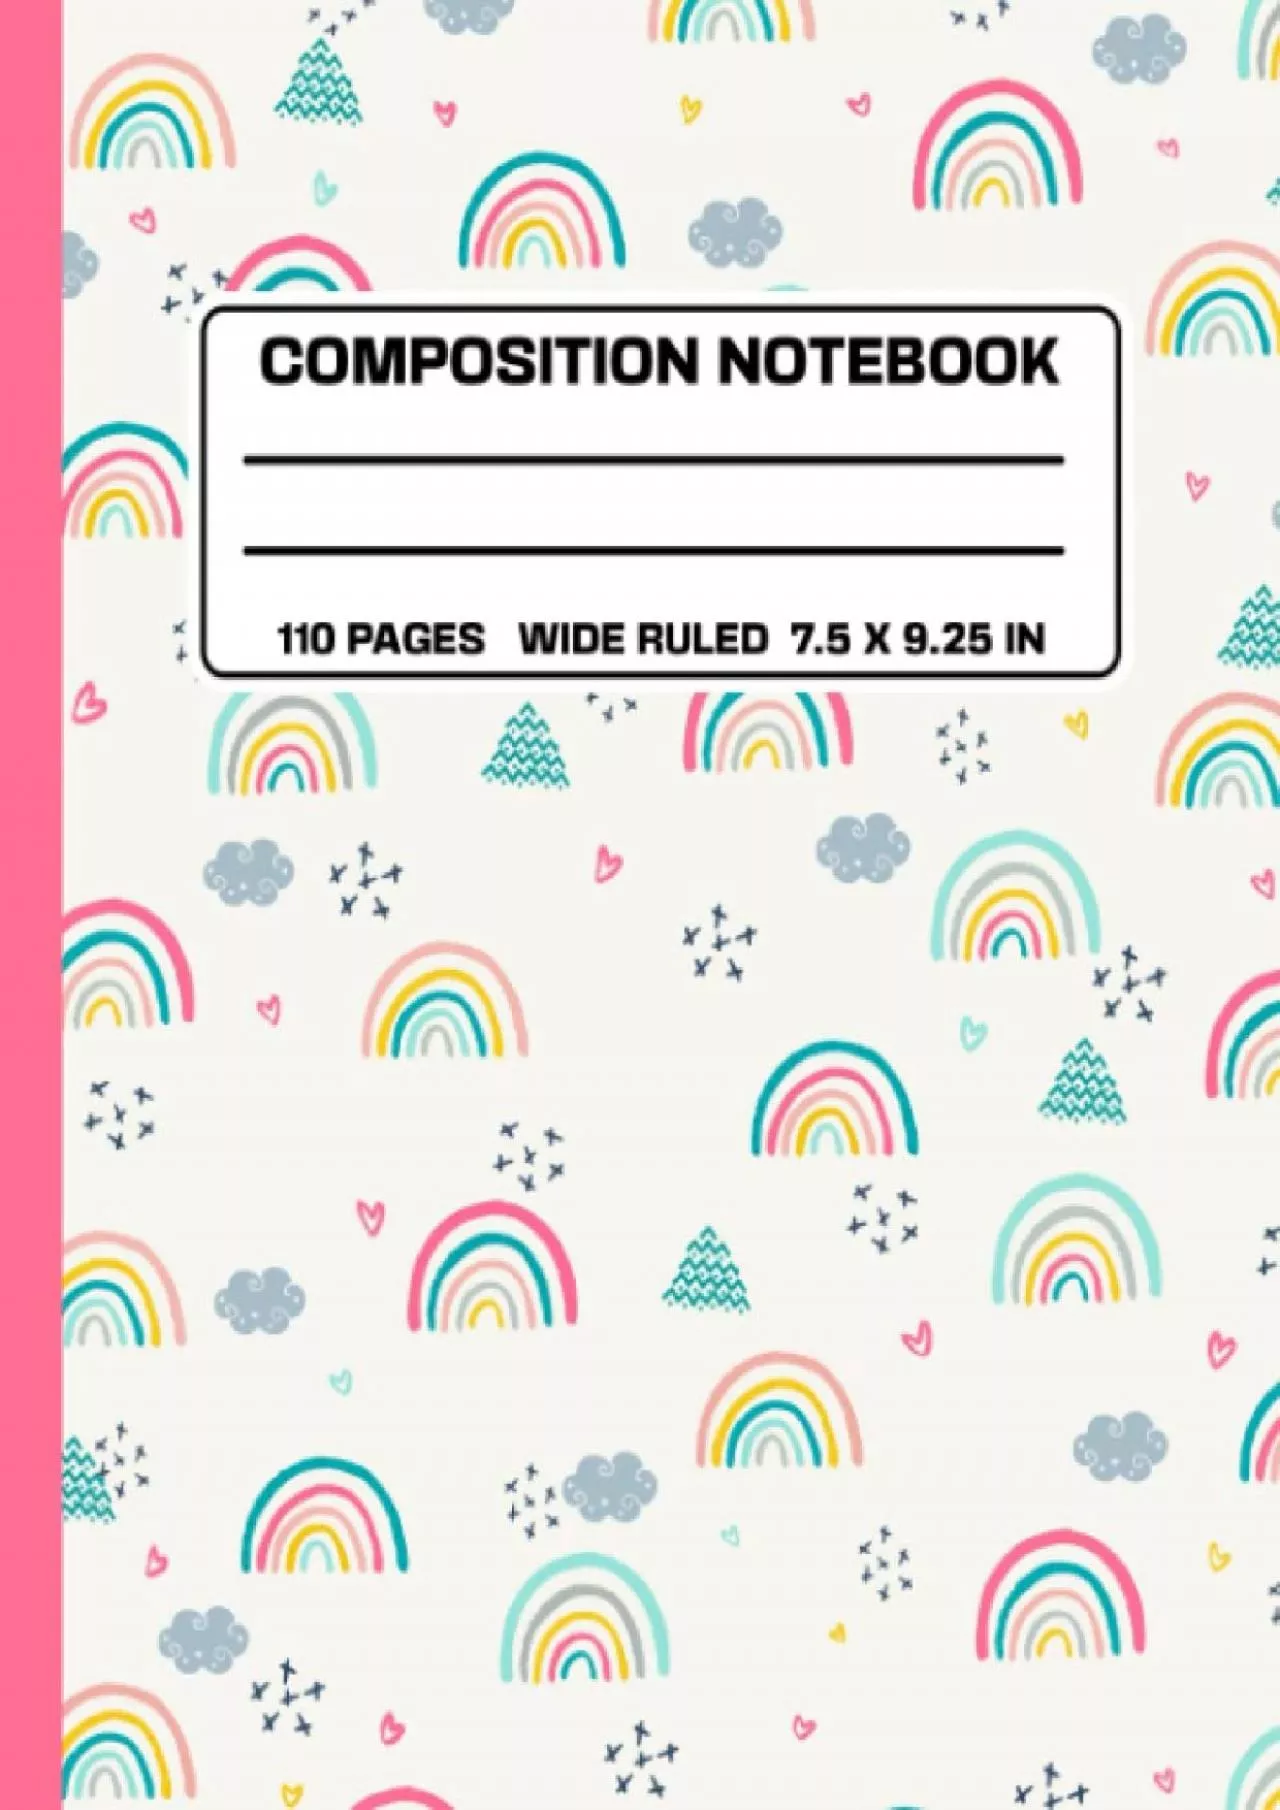 [DOWNLOAD] Composition Notebook Wide Ruled: Cute Composition Notebook for Kids, Teens